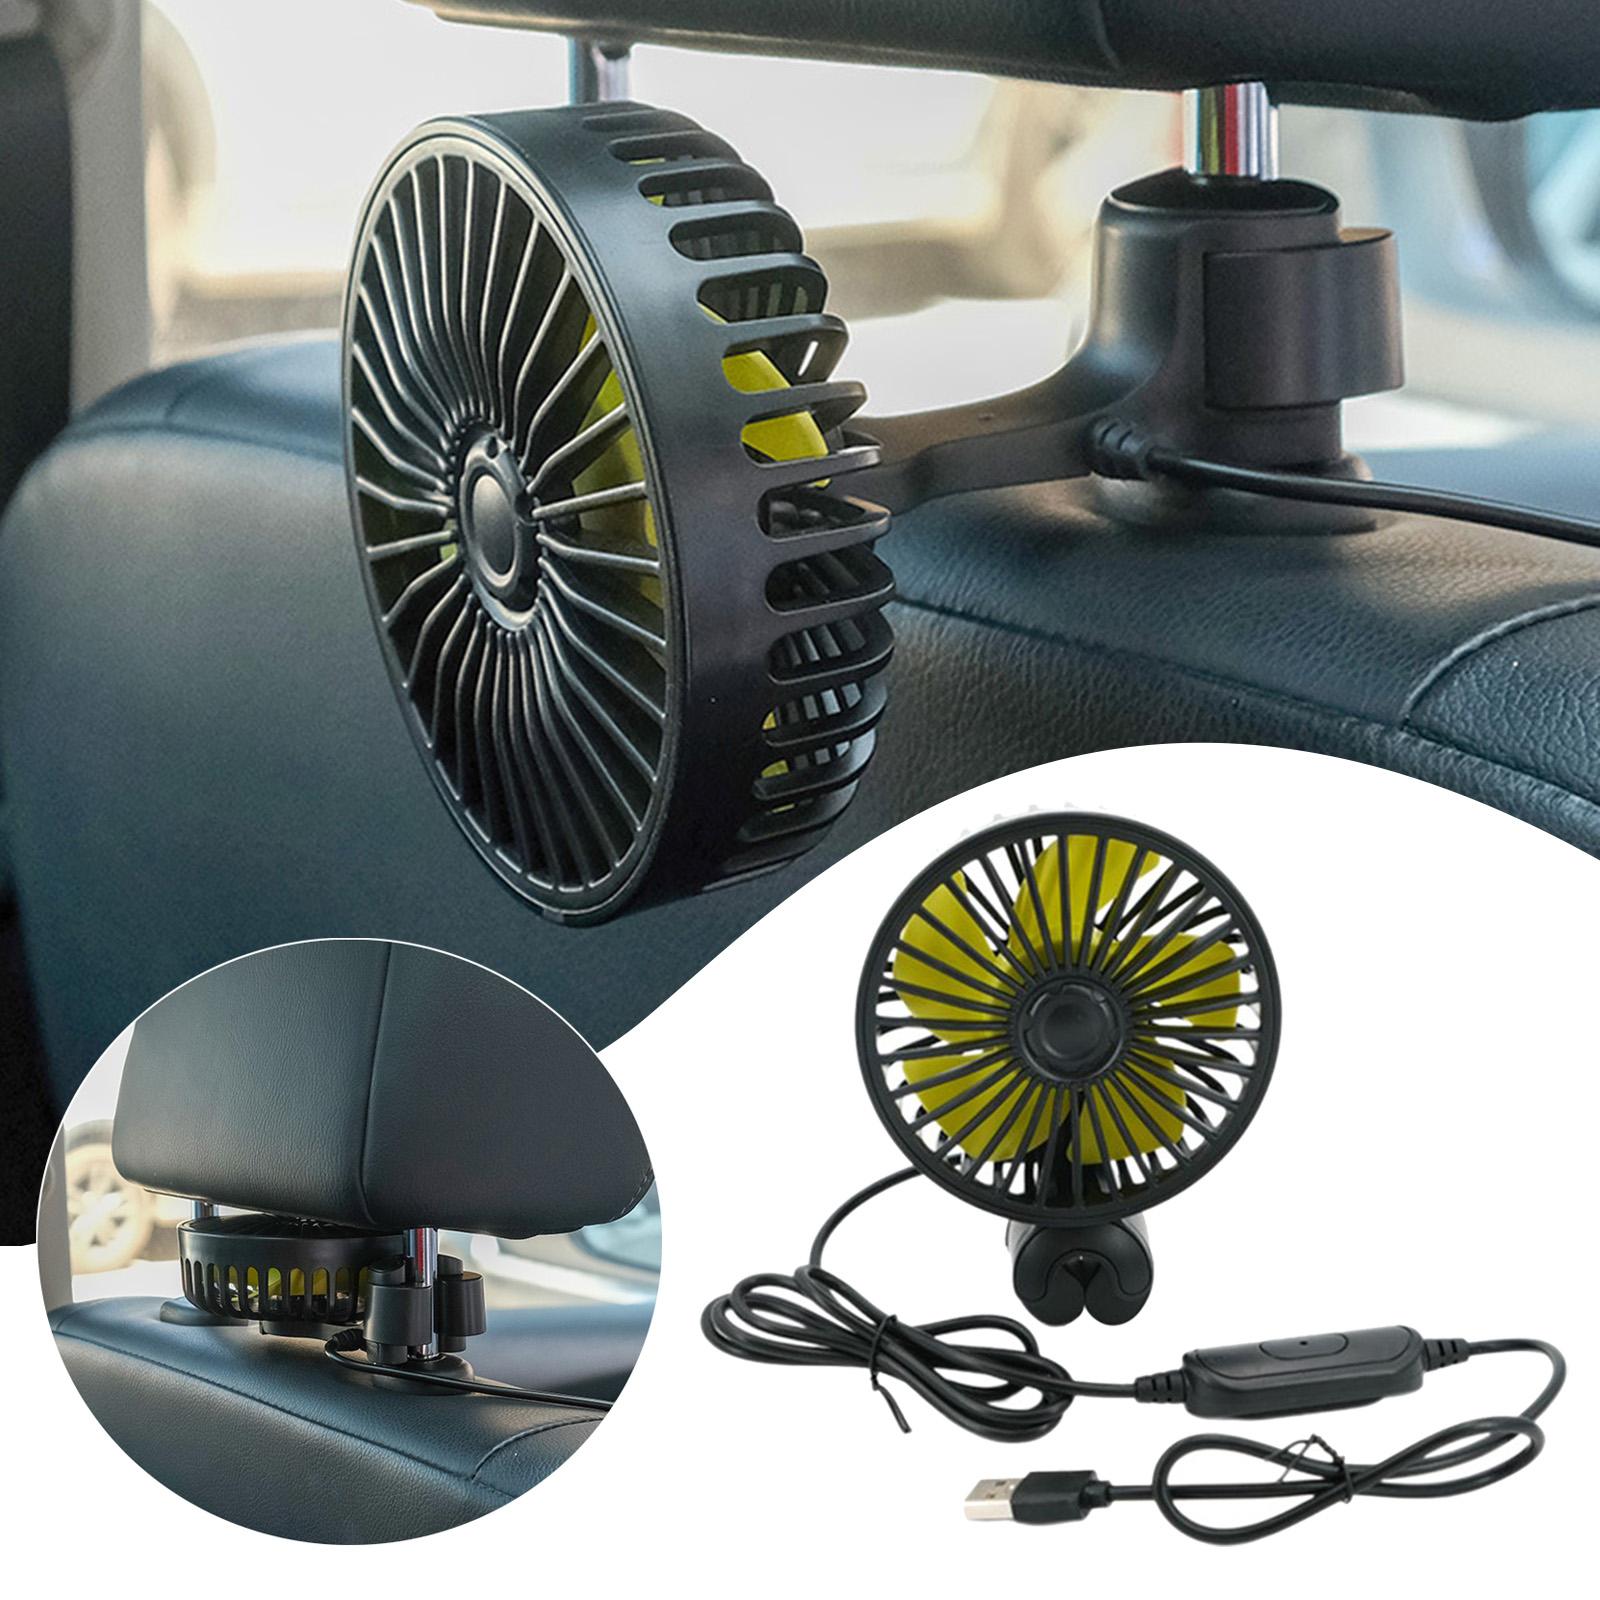 Wired Car Rear Seats Fan 3 Speed Foldable for Travel Home Office Baby Adults